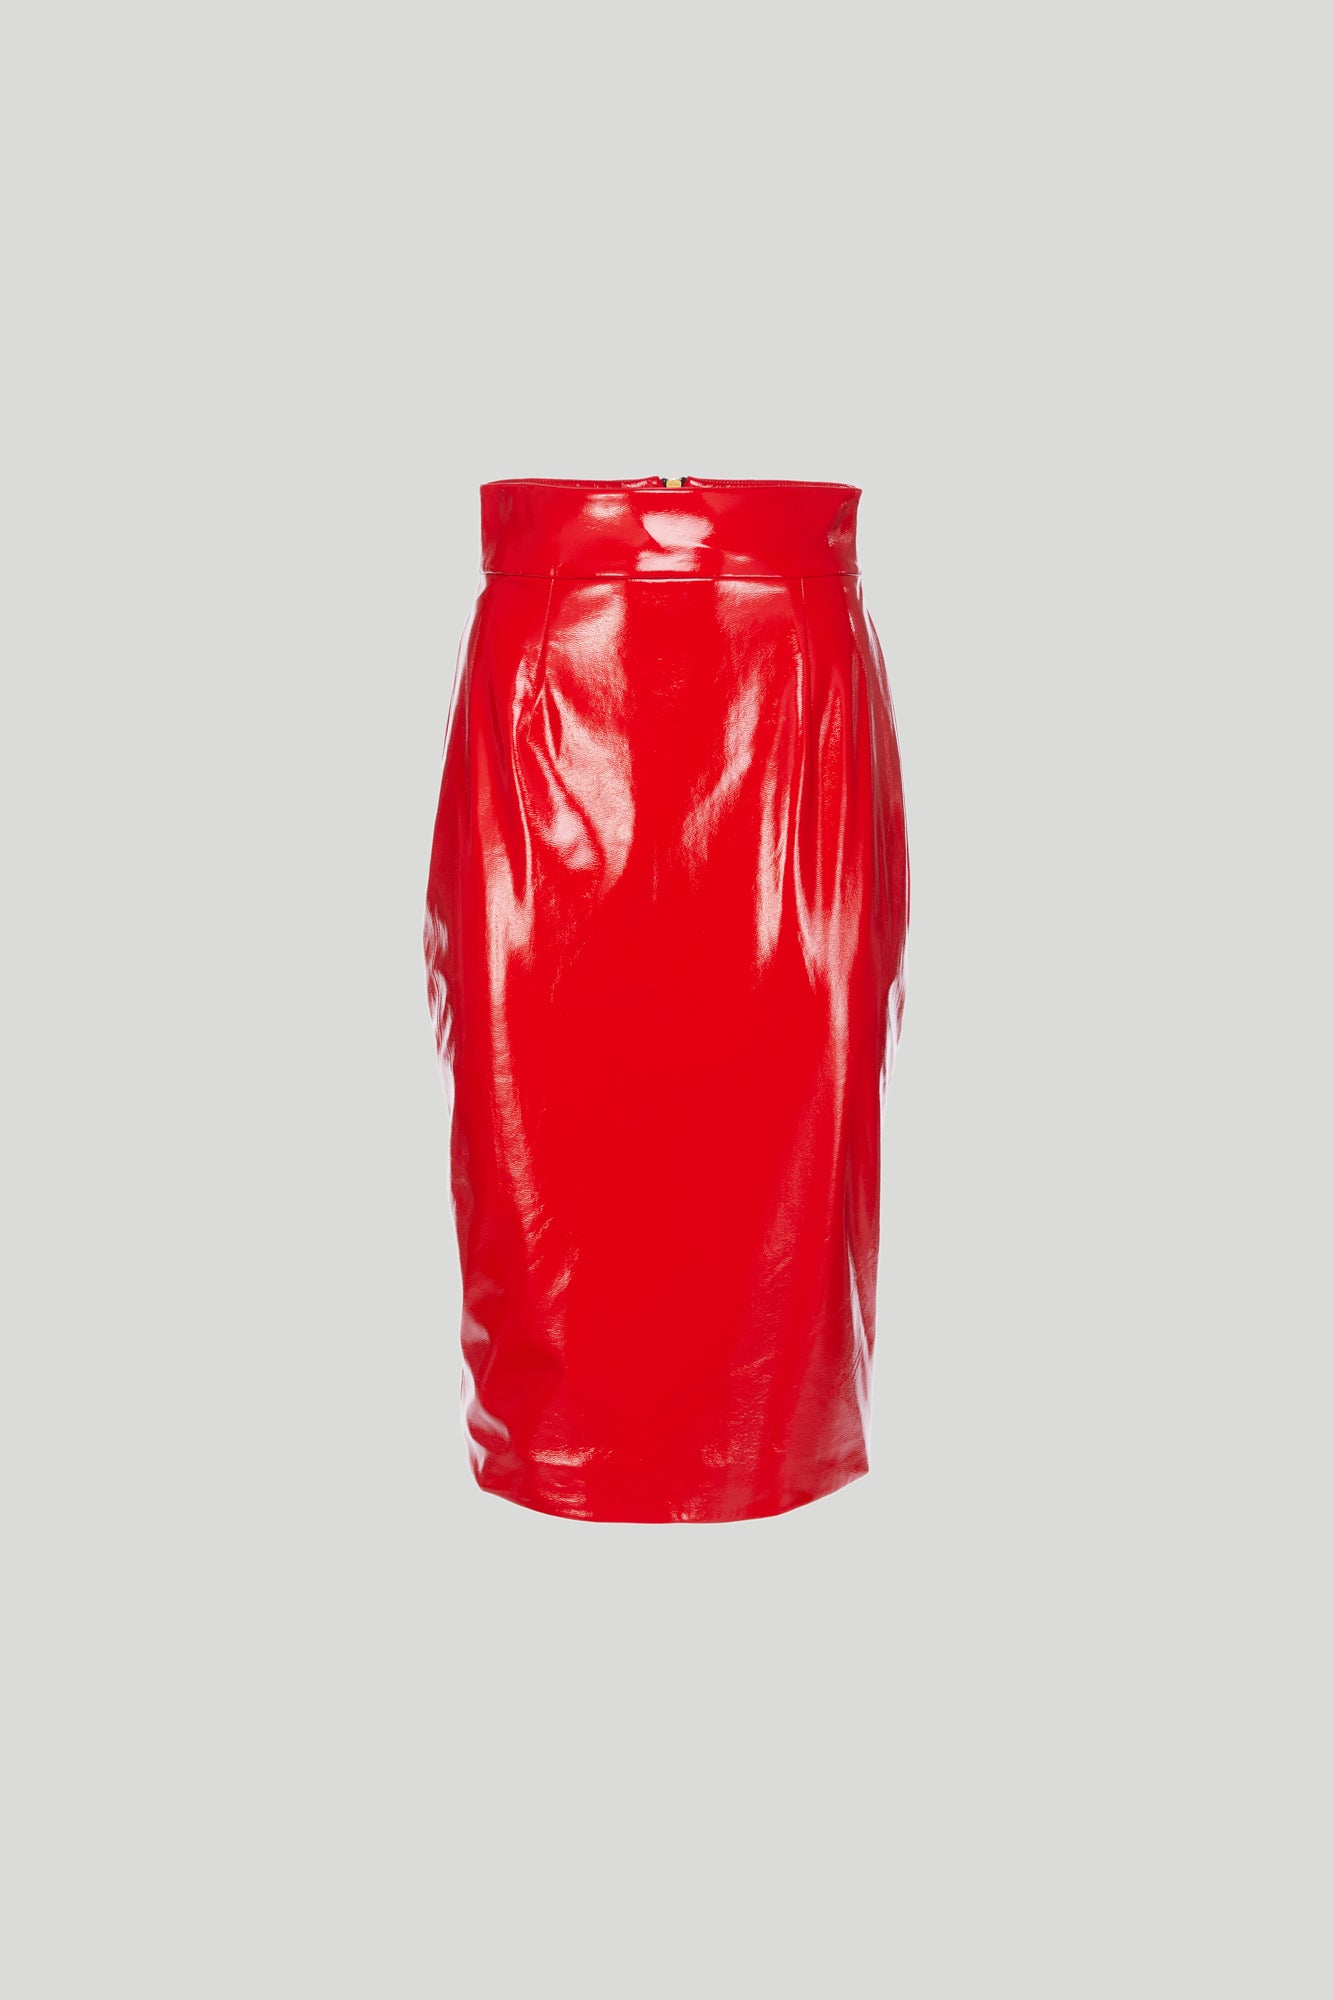 NINEMINUTES The Pencil Latex Red Skirt